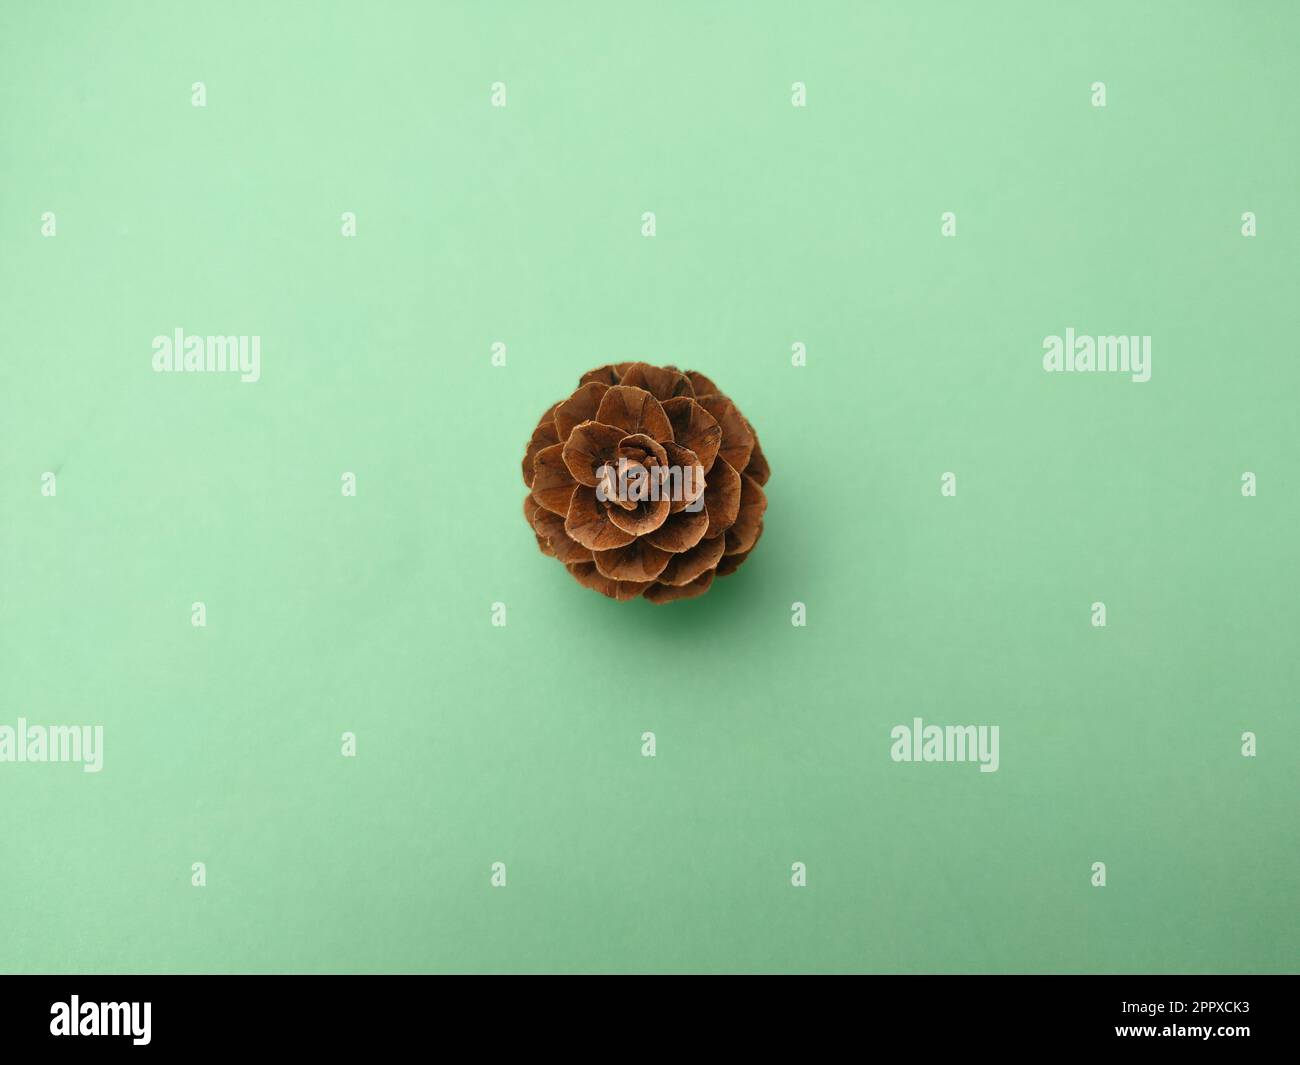 Conifer cone on a green background.A conifer cone is a seed-bearing organ on gymnosperm plants. Stock Photo